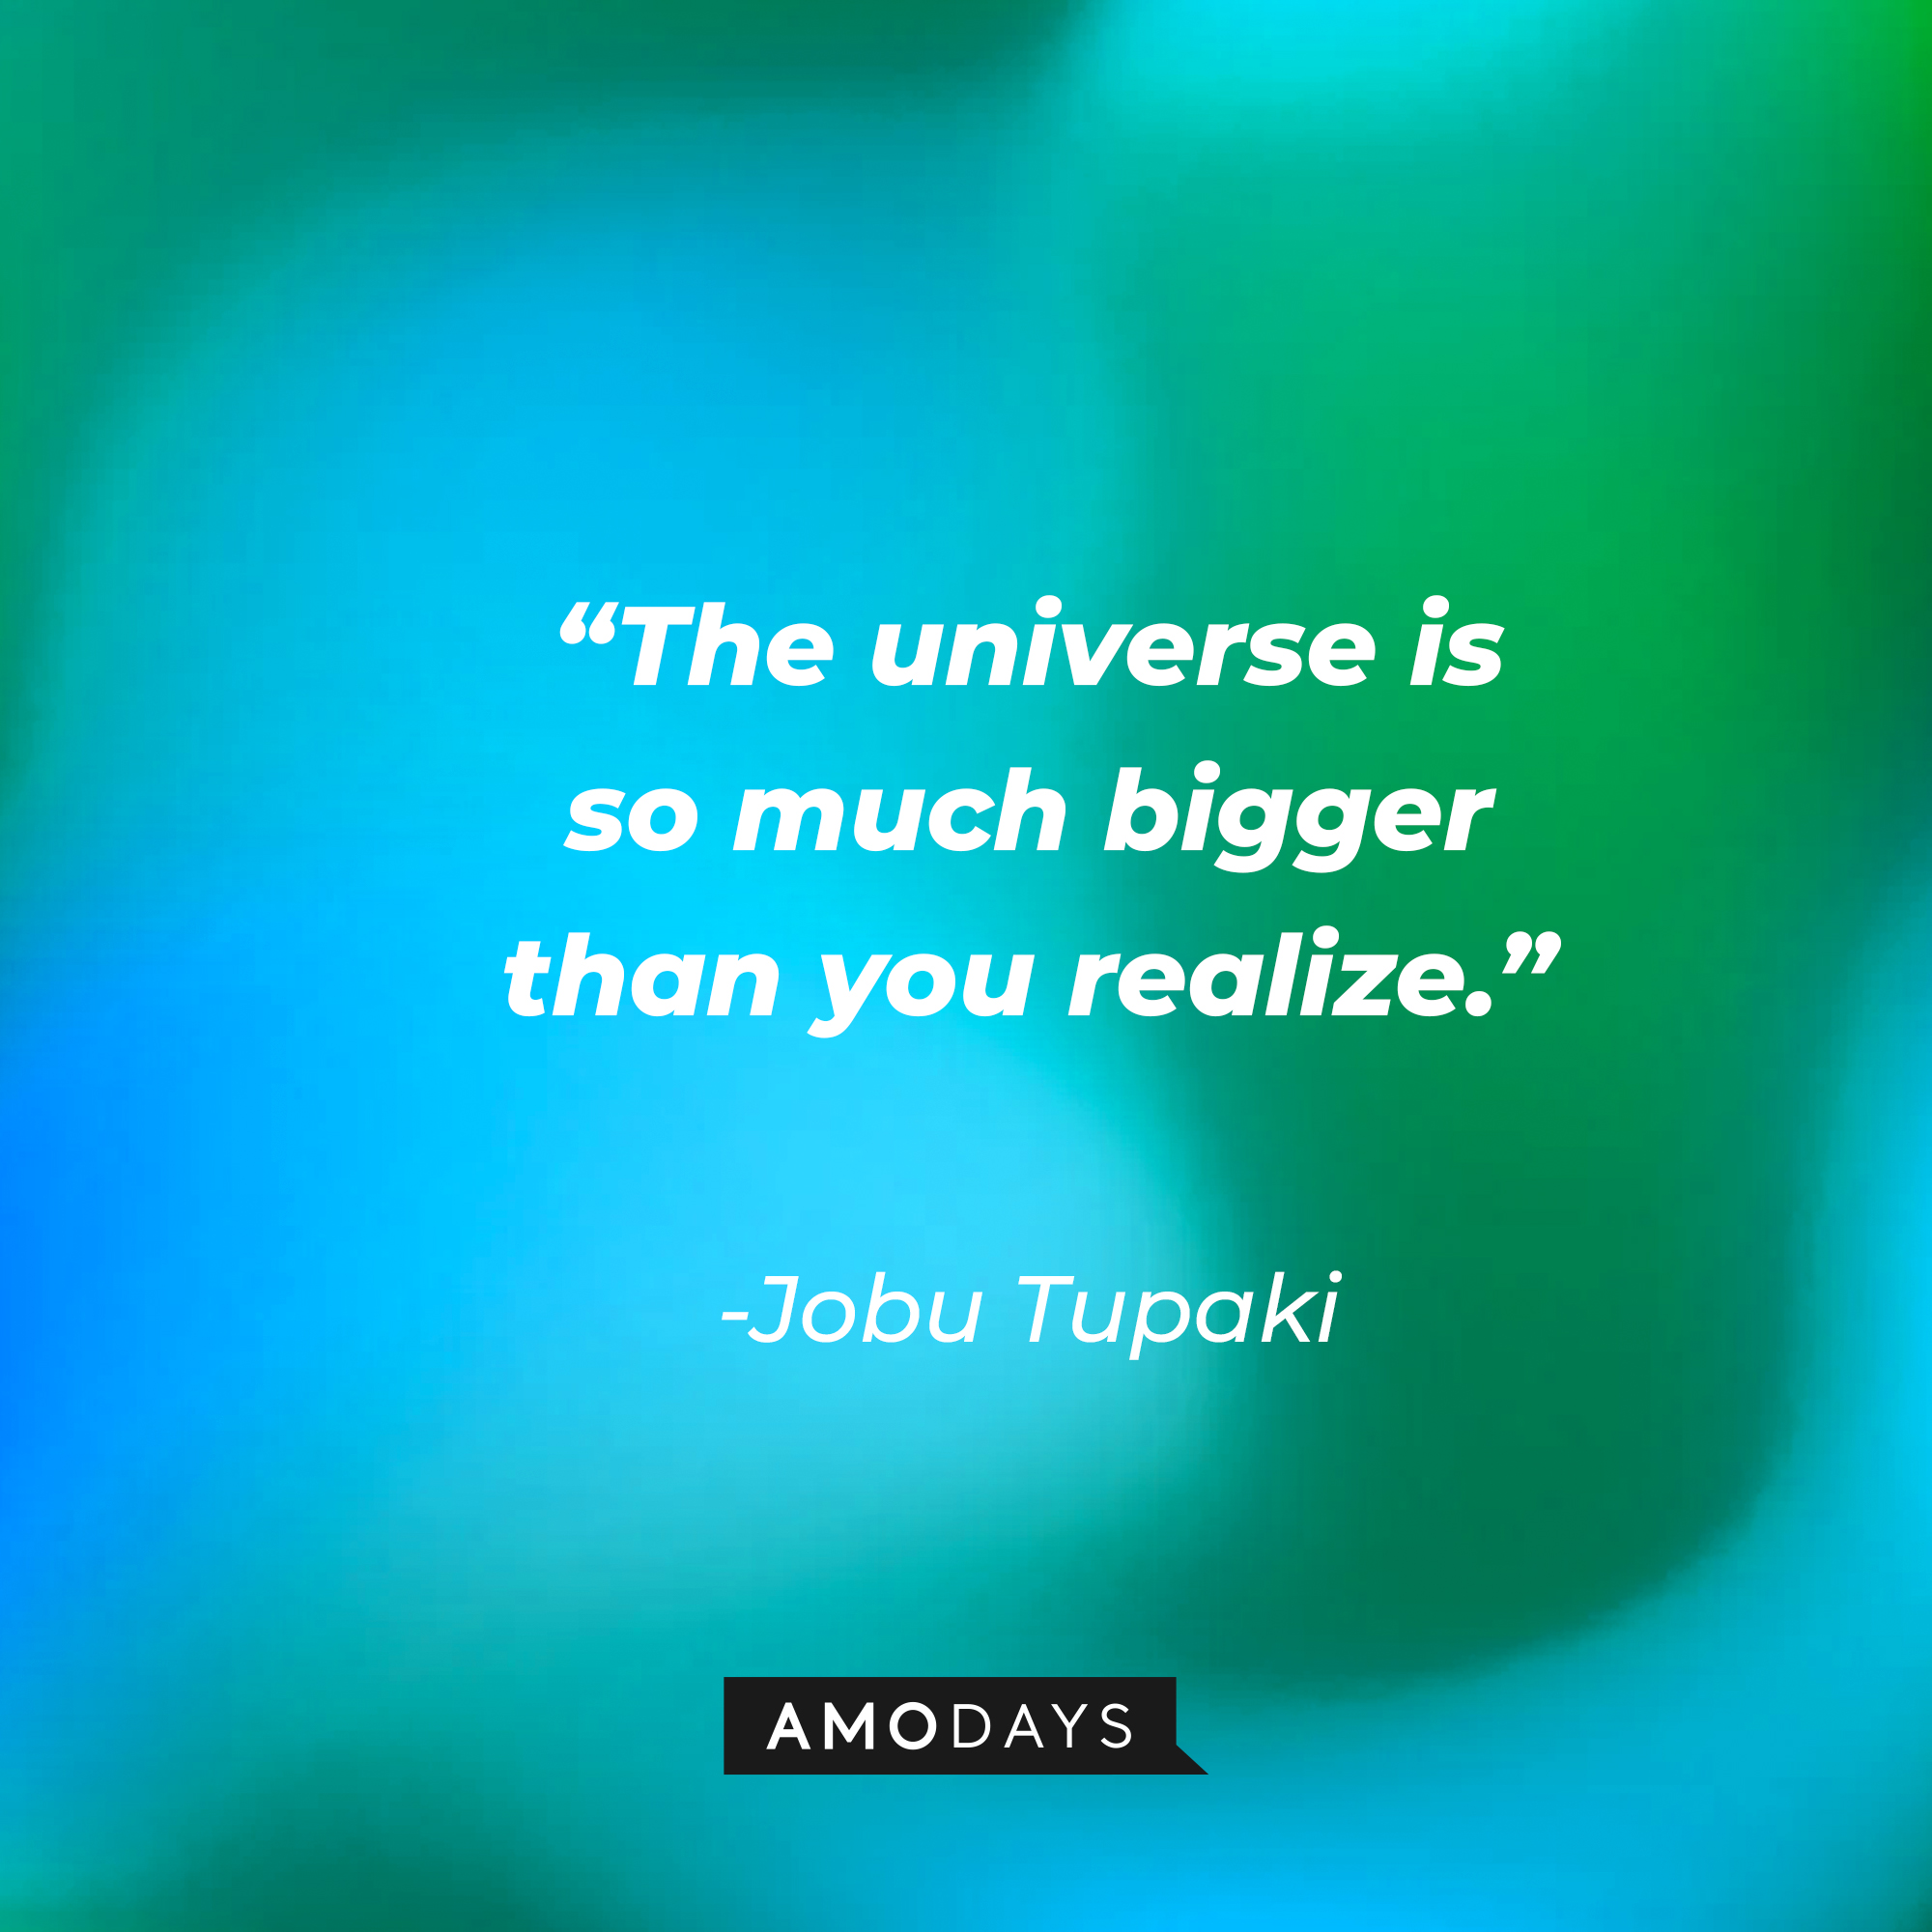 Jobu Tupaki’s quote: “The universe is so much bigger than you realize.”  | Source: AmoDays